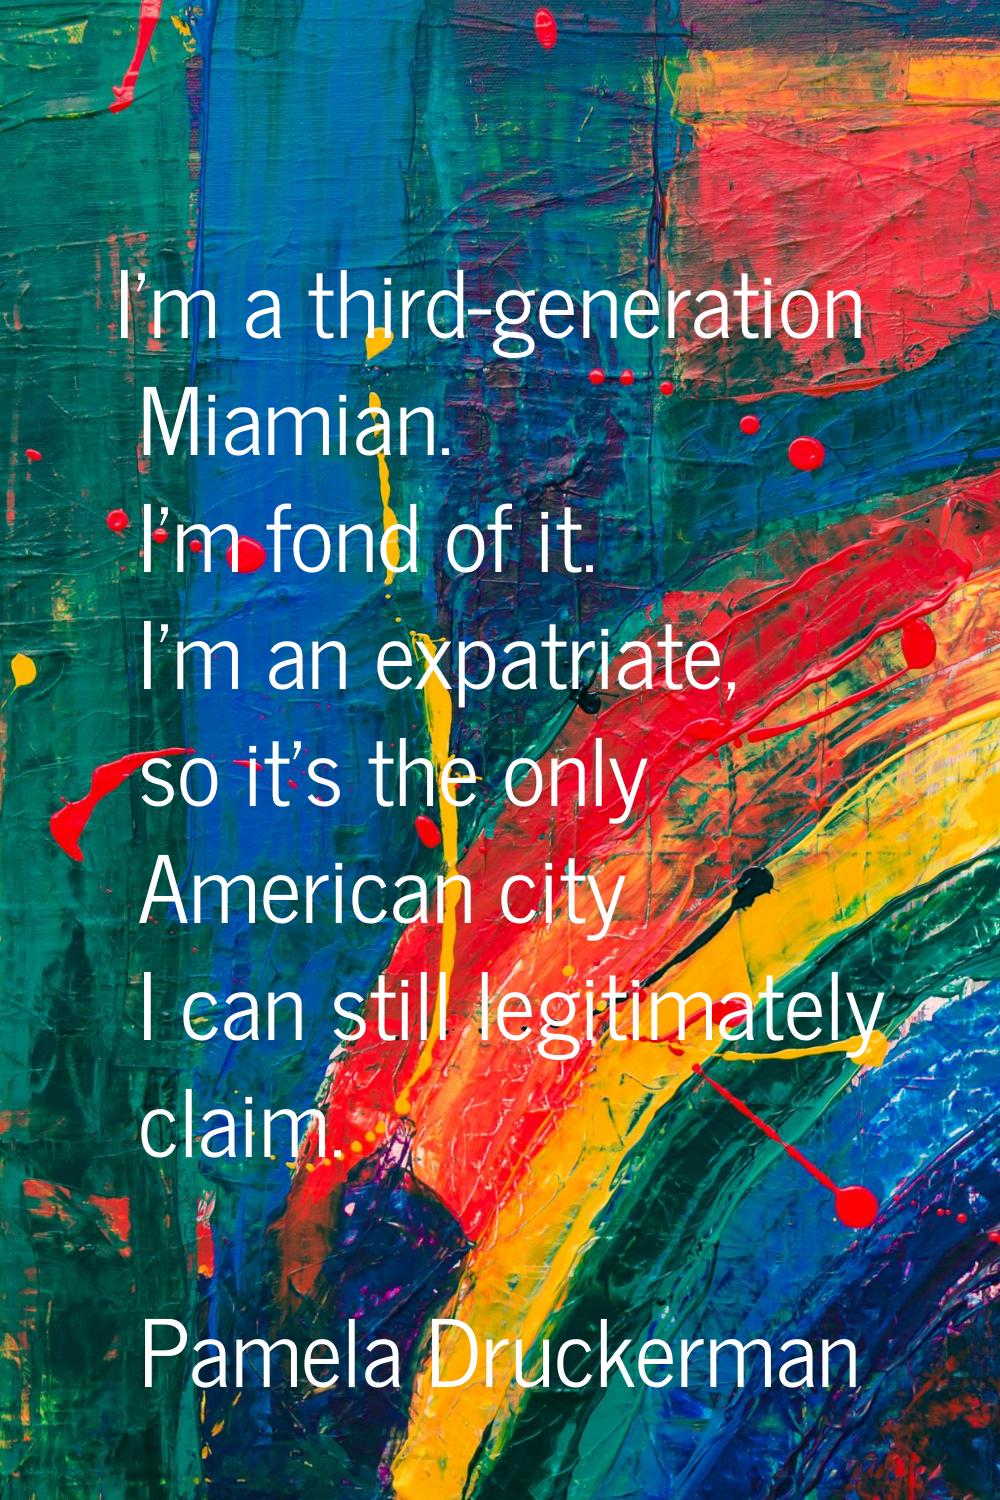 I'm a third-generation Miamian. I'm fond of it. I'm an expatriate, so it's the only American city I